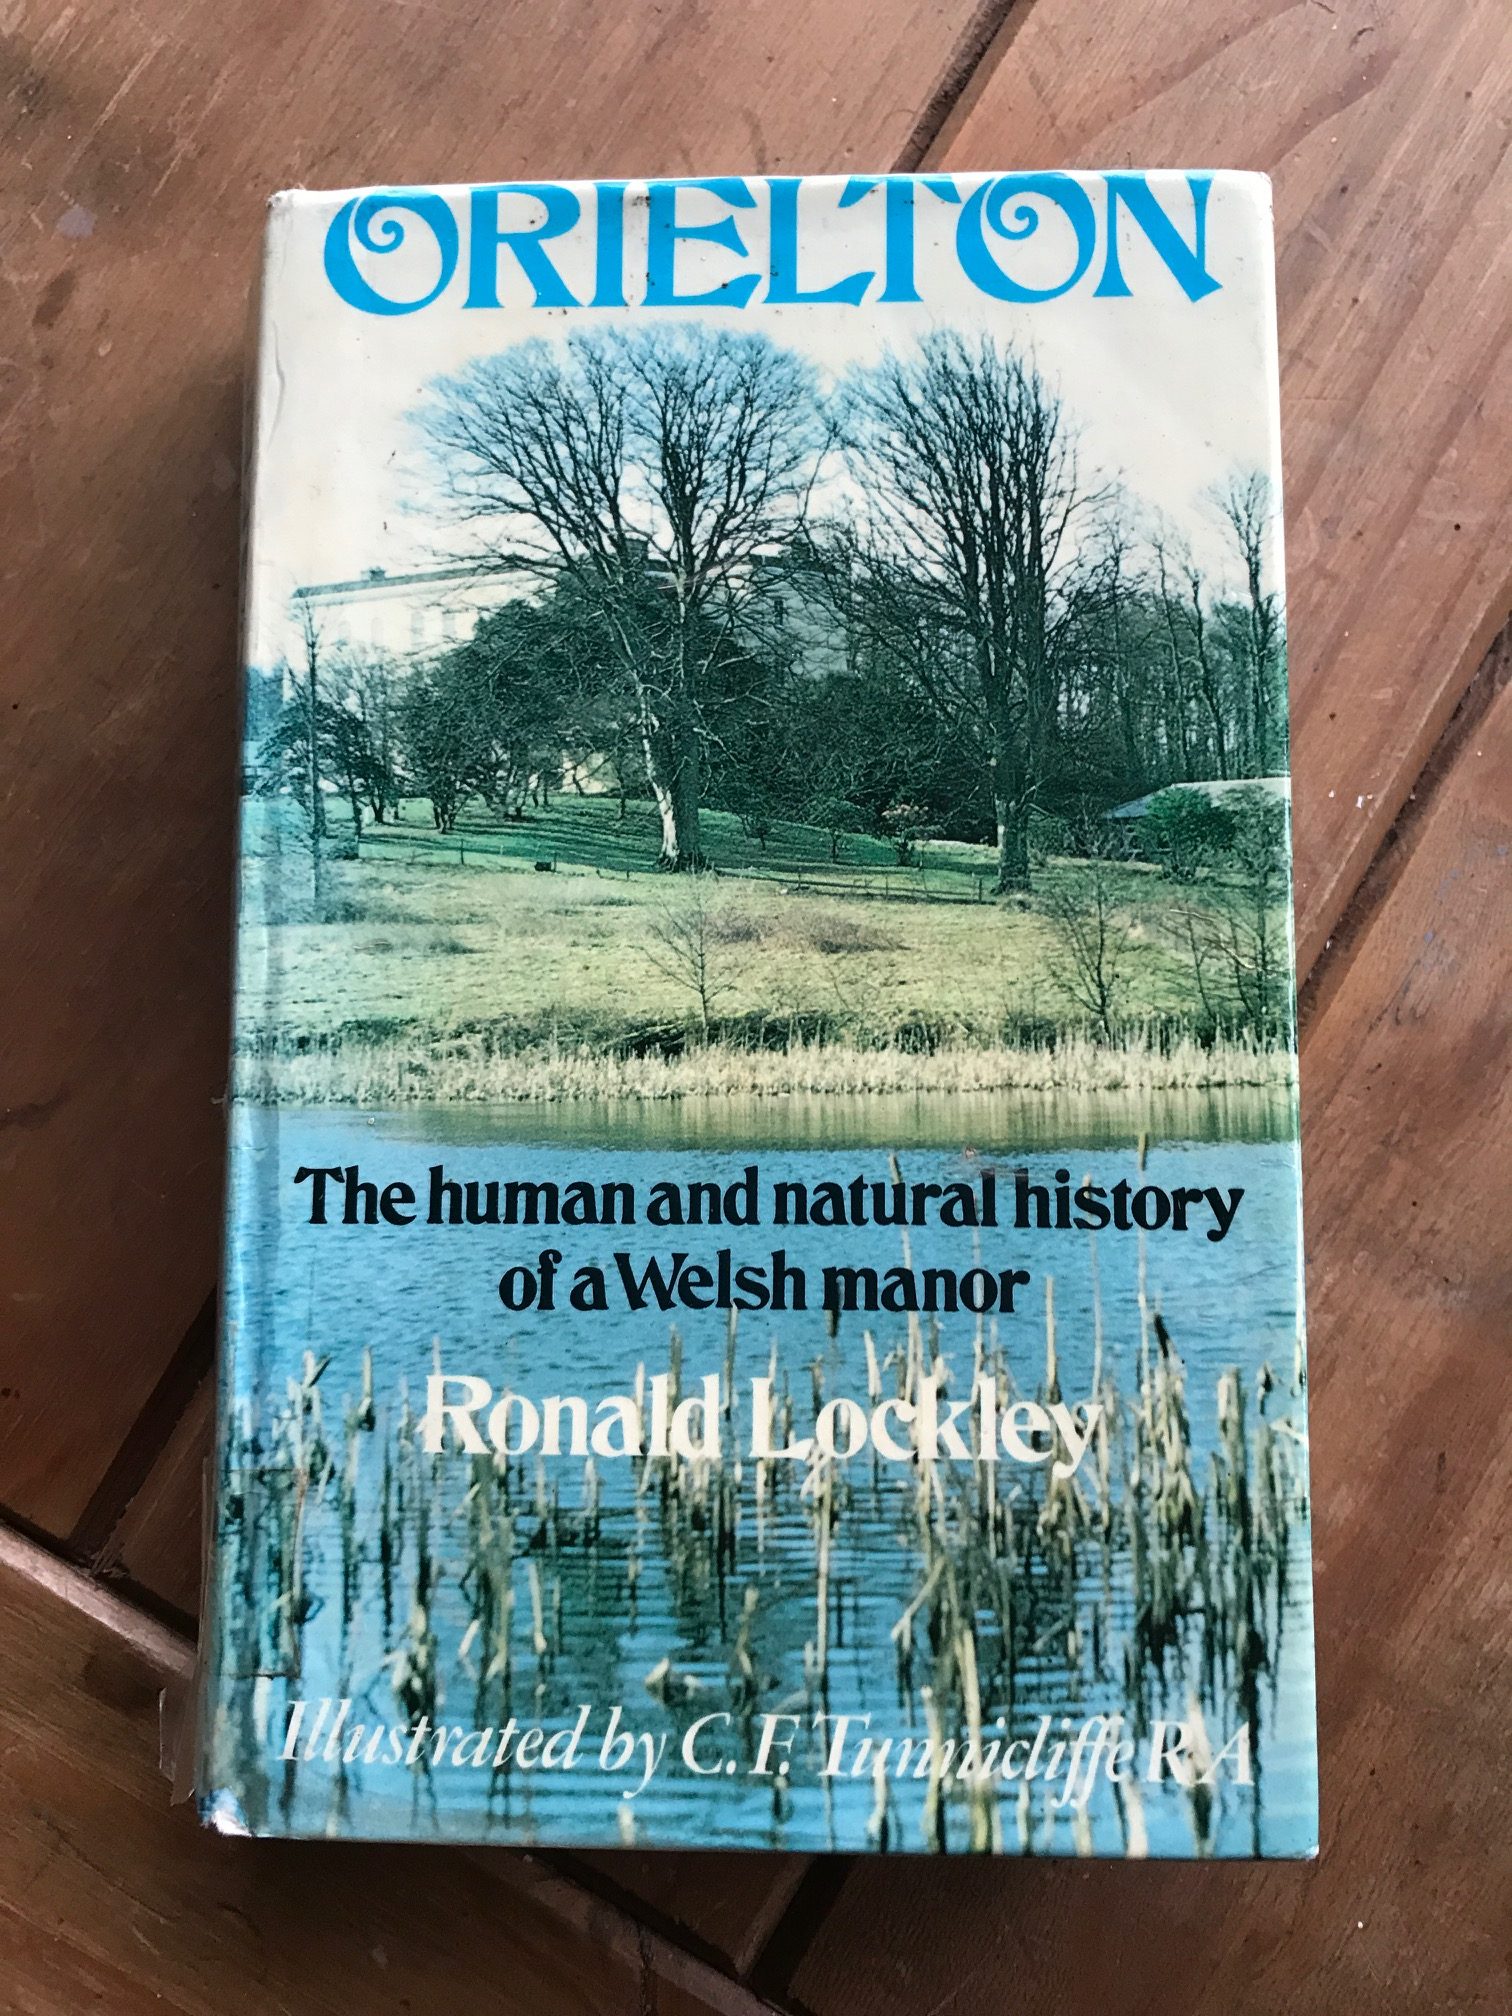 Kate Strudwick: “Orielton” The human and natural history of a Welsh Manor by Ronald Lockley.